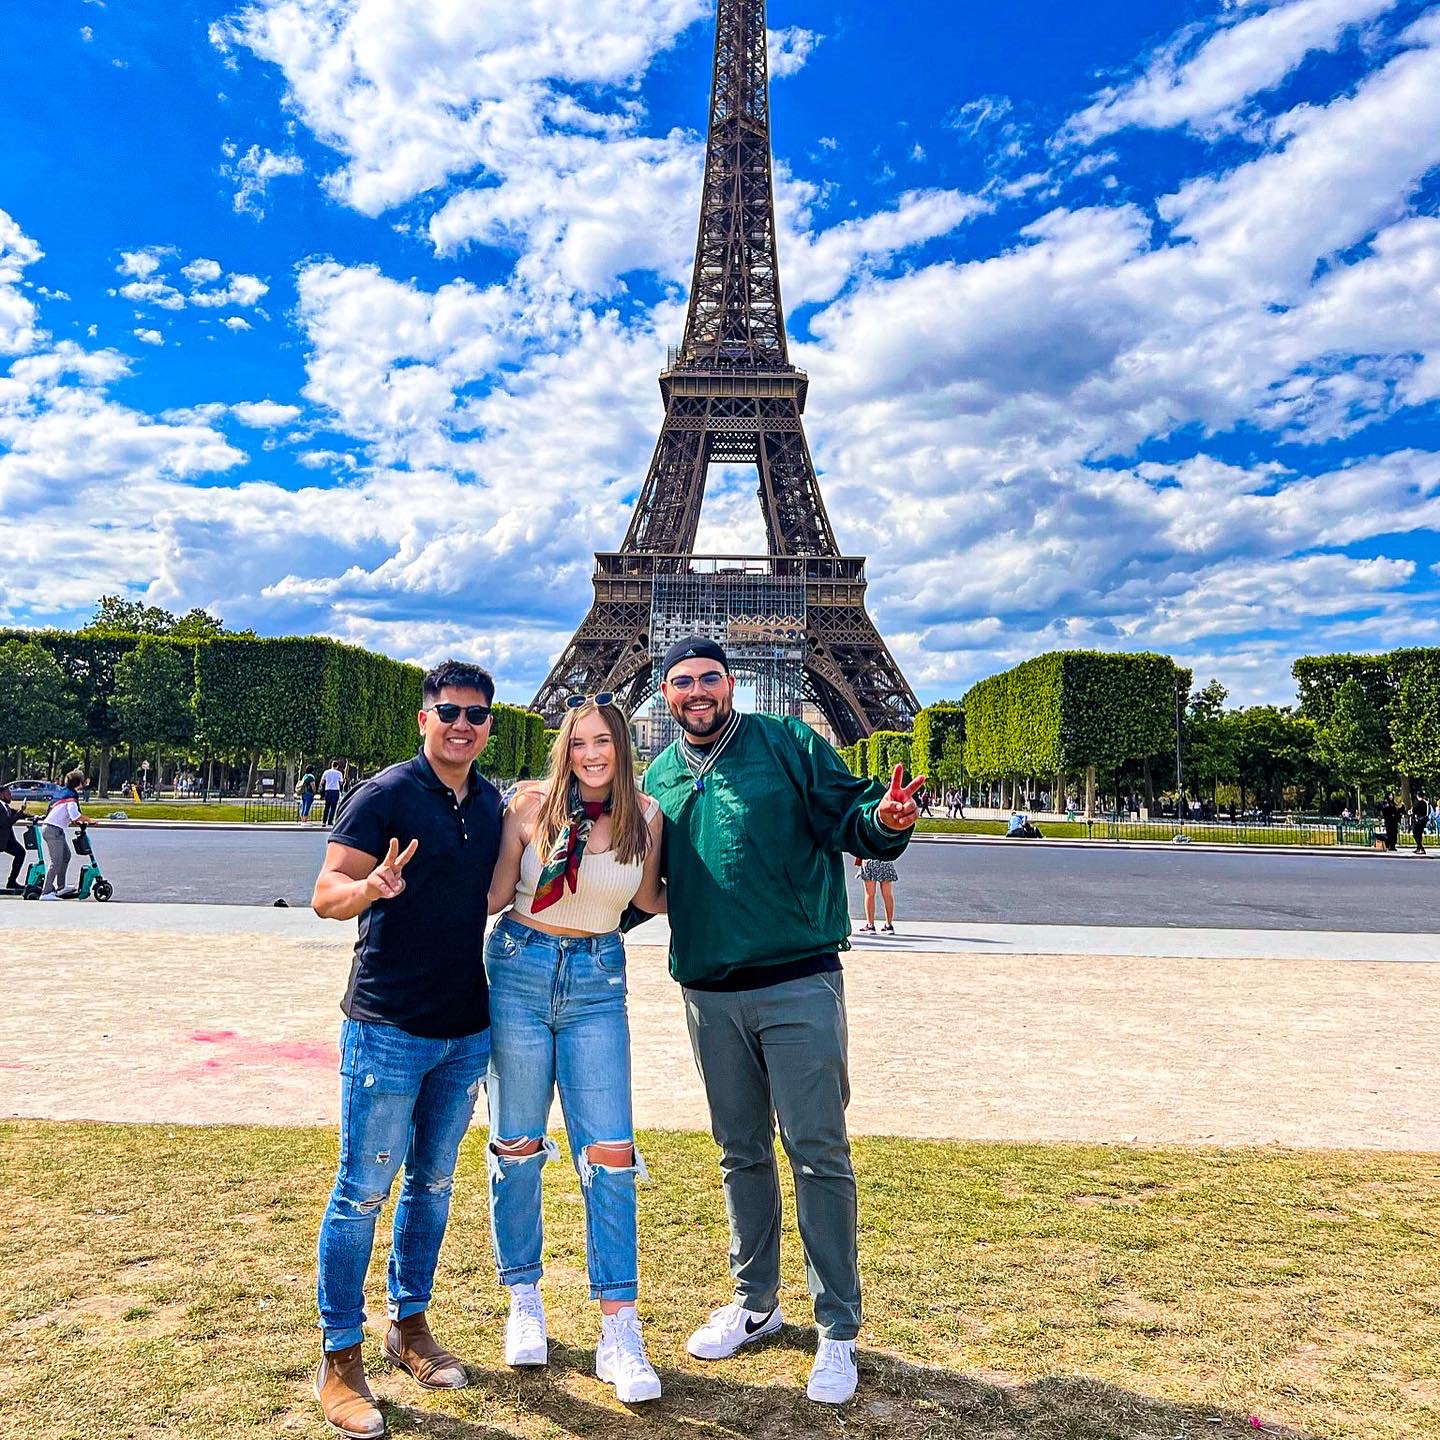 Kevin with friends at Eiffel Tower